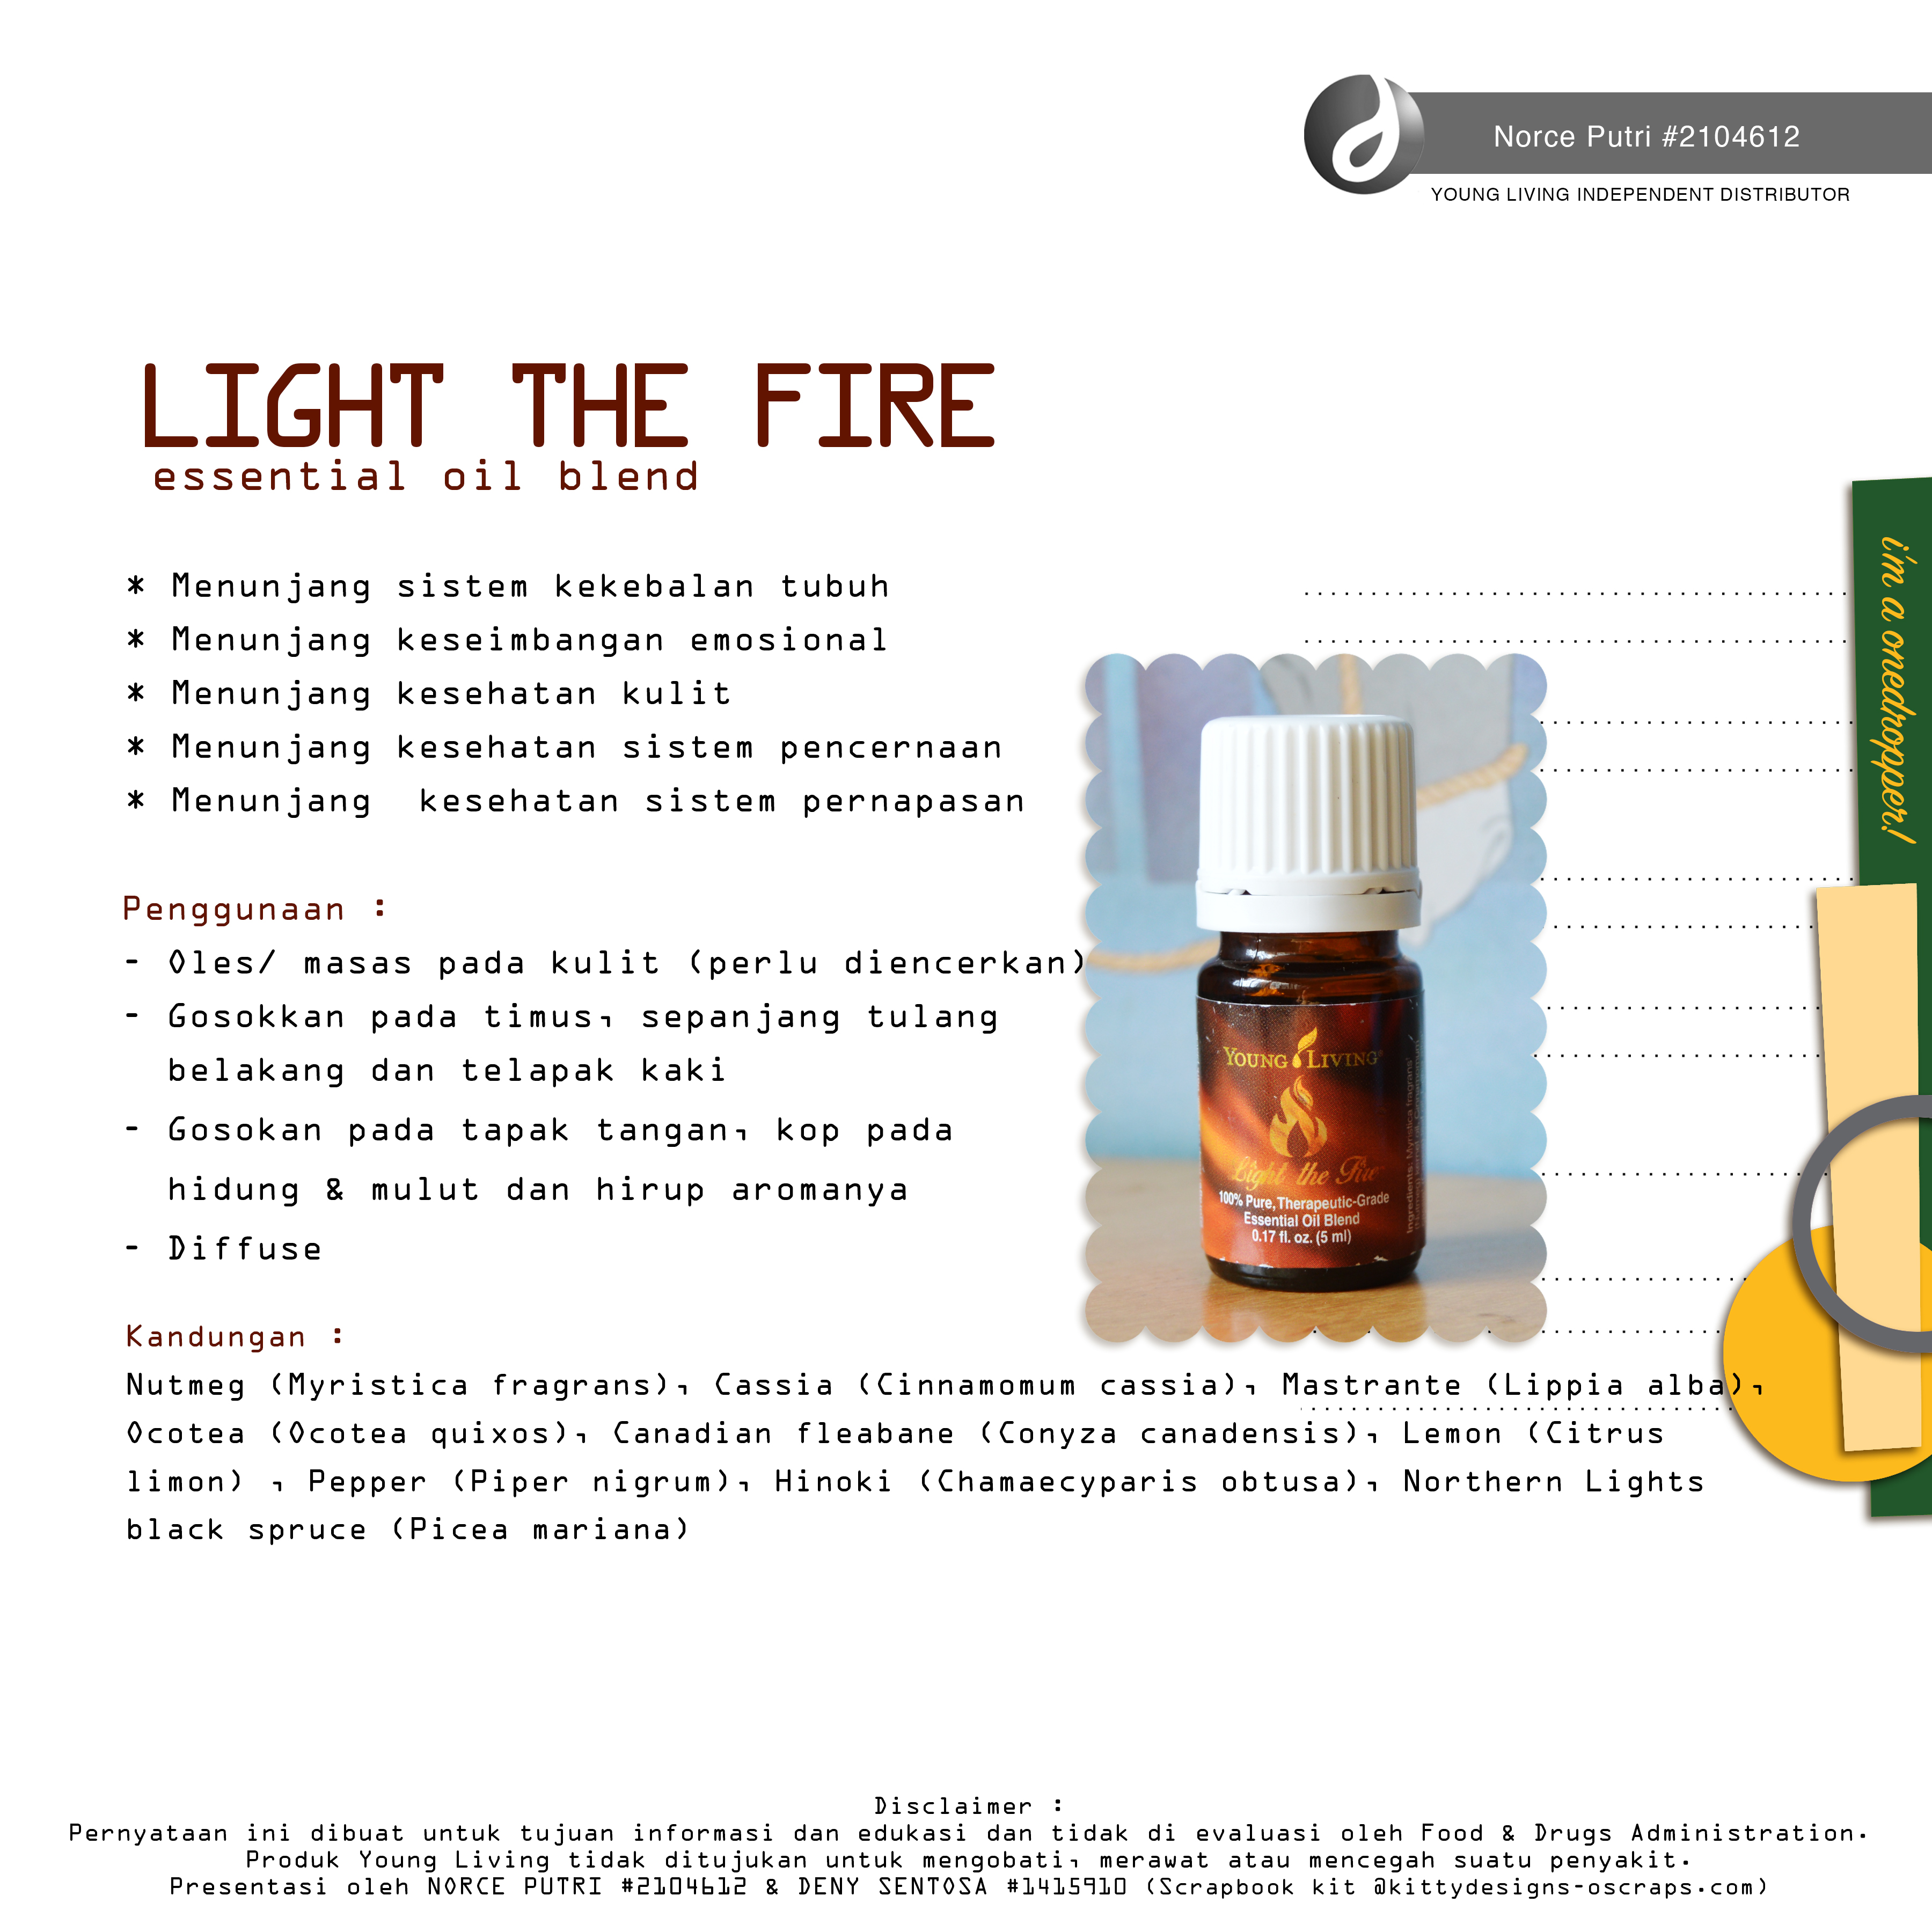 light-the-fire-indo-norce